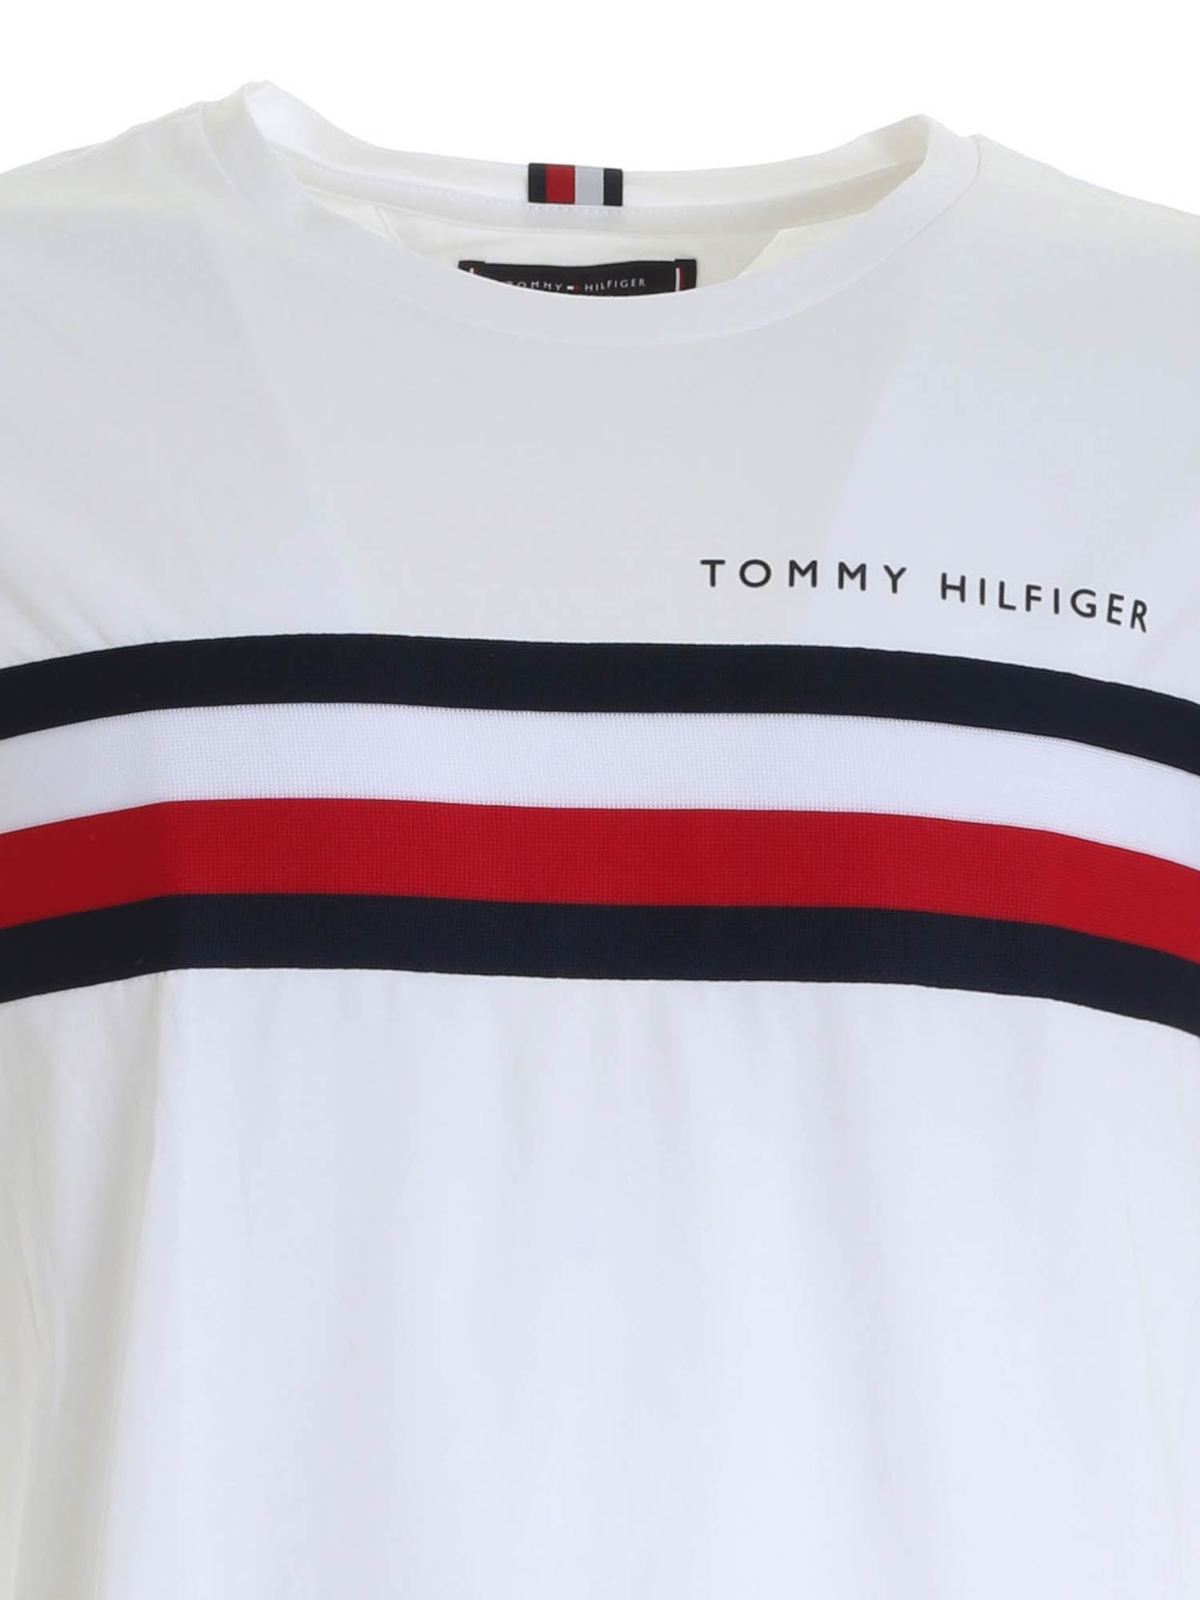 Tommy Hilfiger Global Factory Sale, UP TO 60% OFF | www 